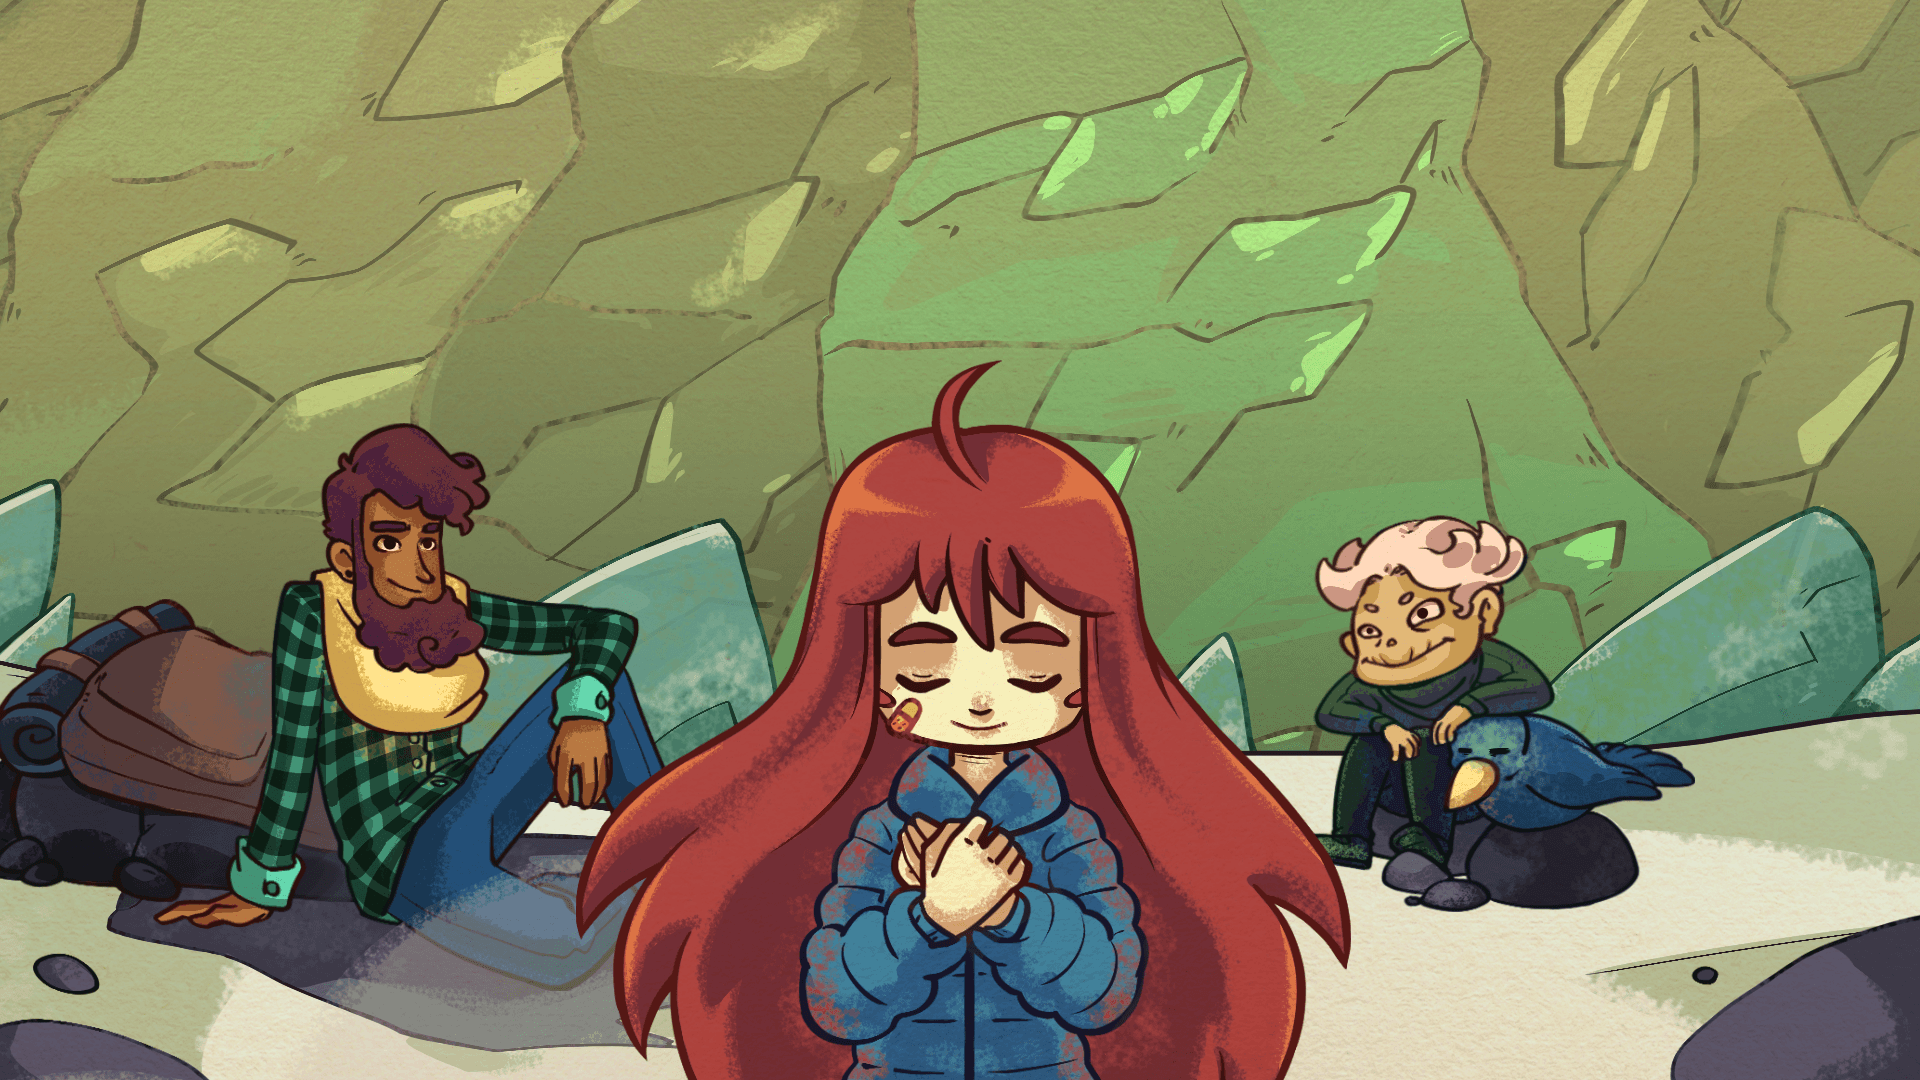 Celeste Game Wallpaper games review, play online games